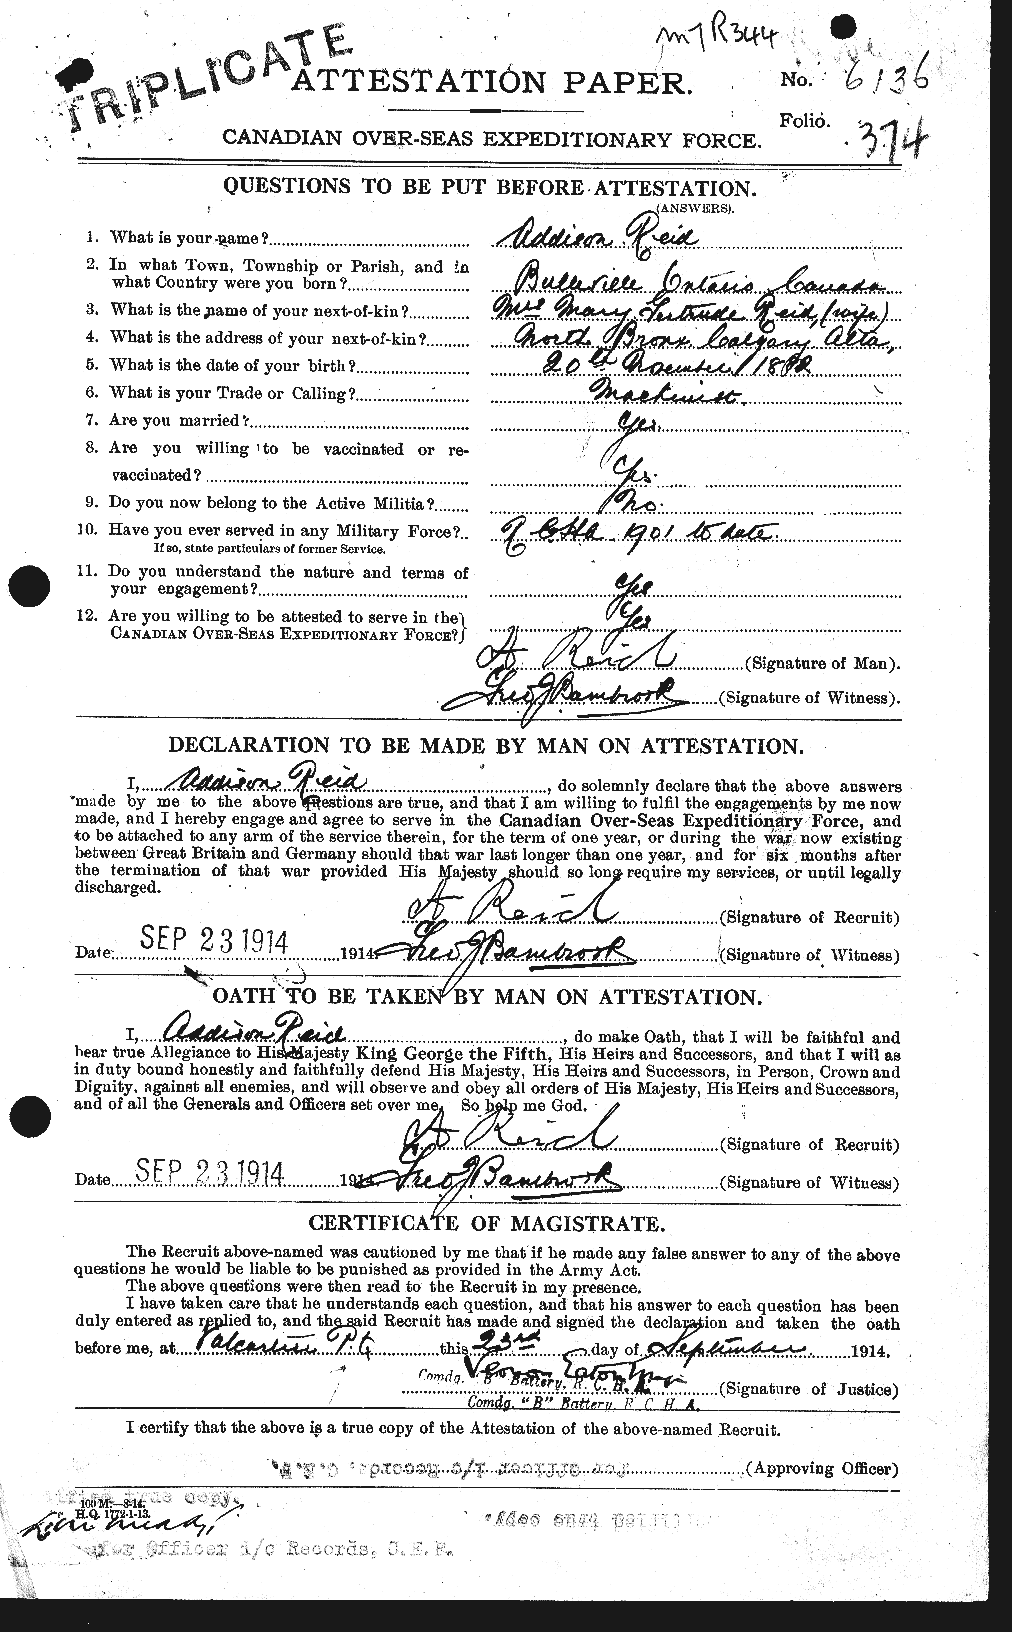 Personnel Records of the First World War - CEF 597736a